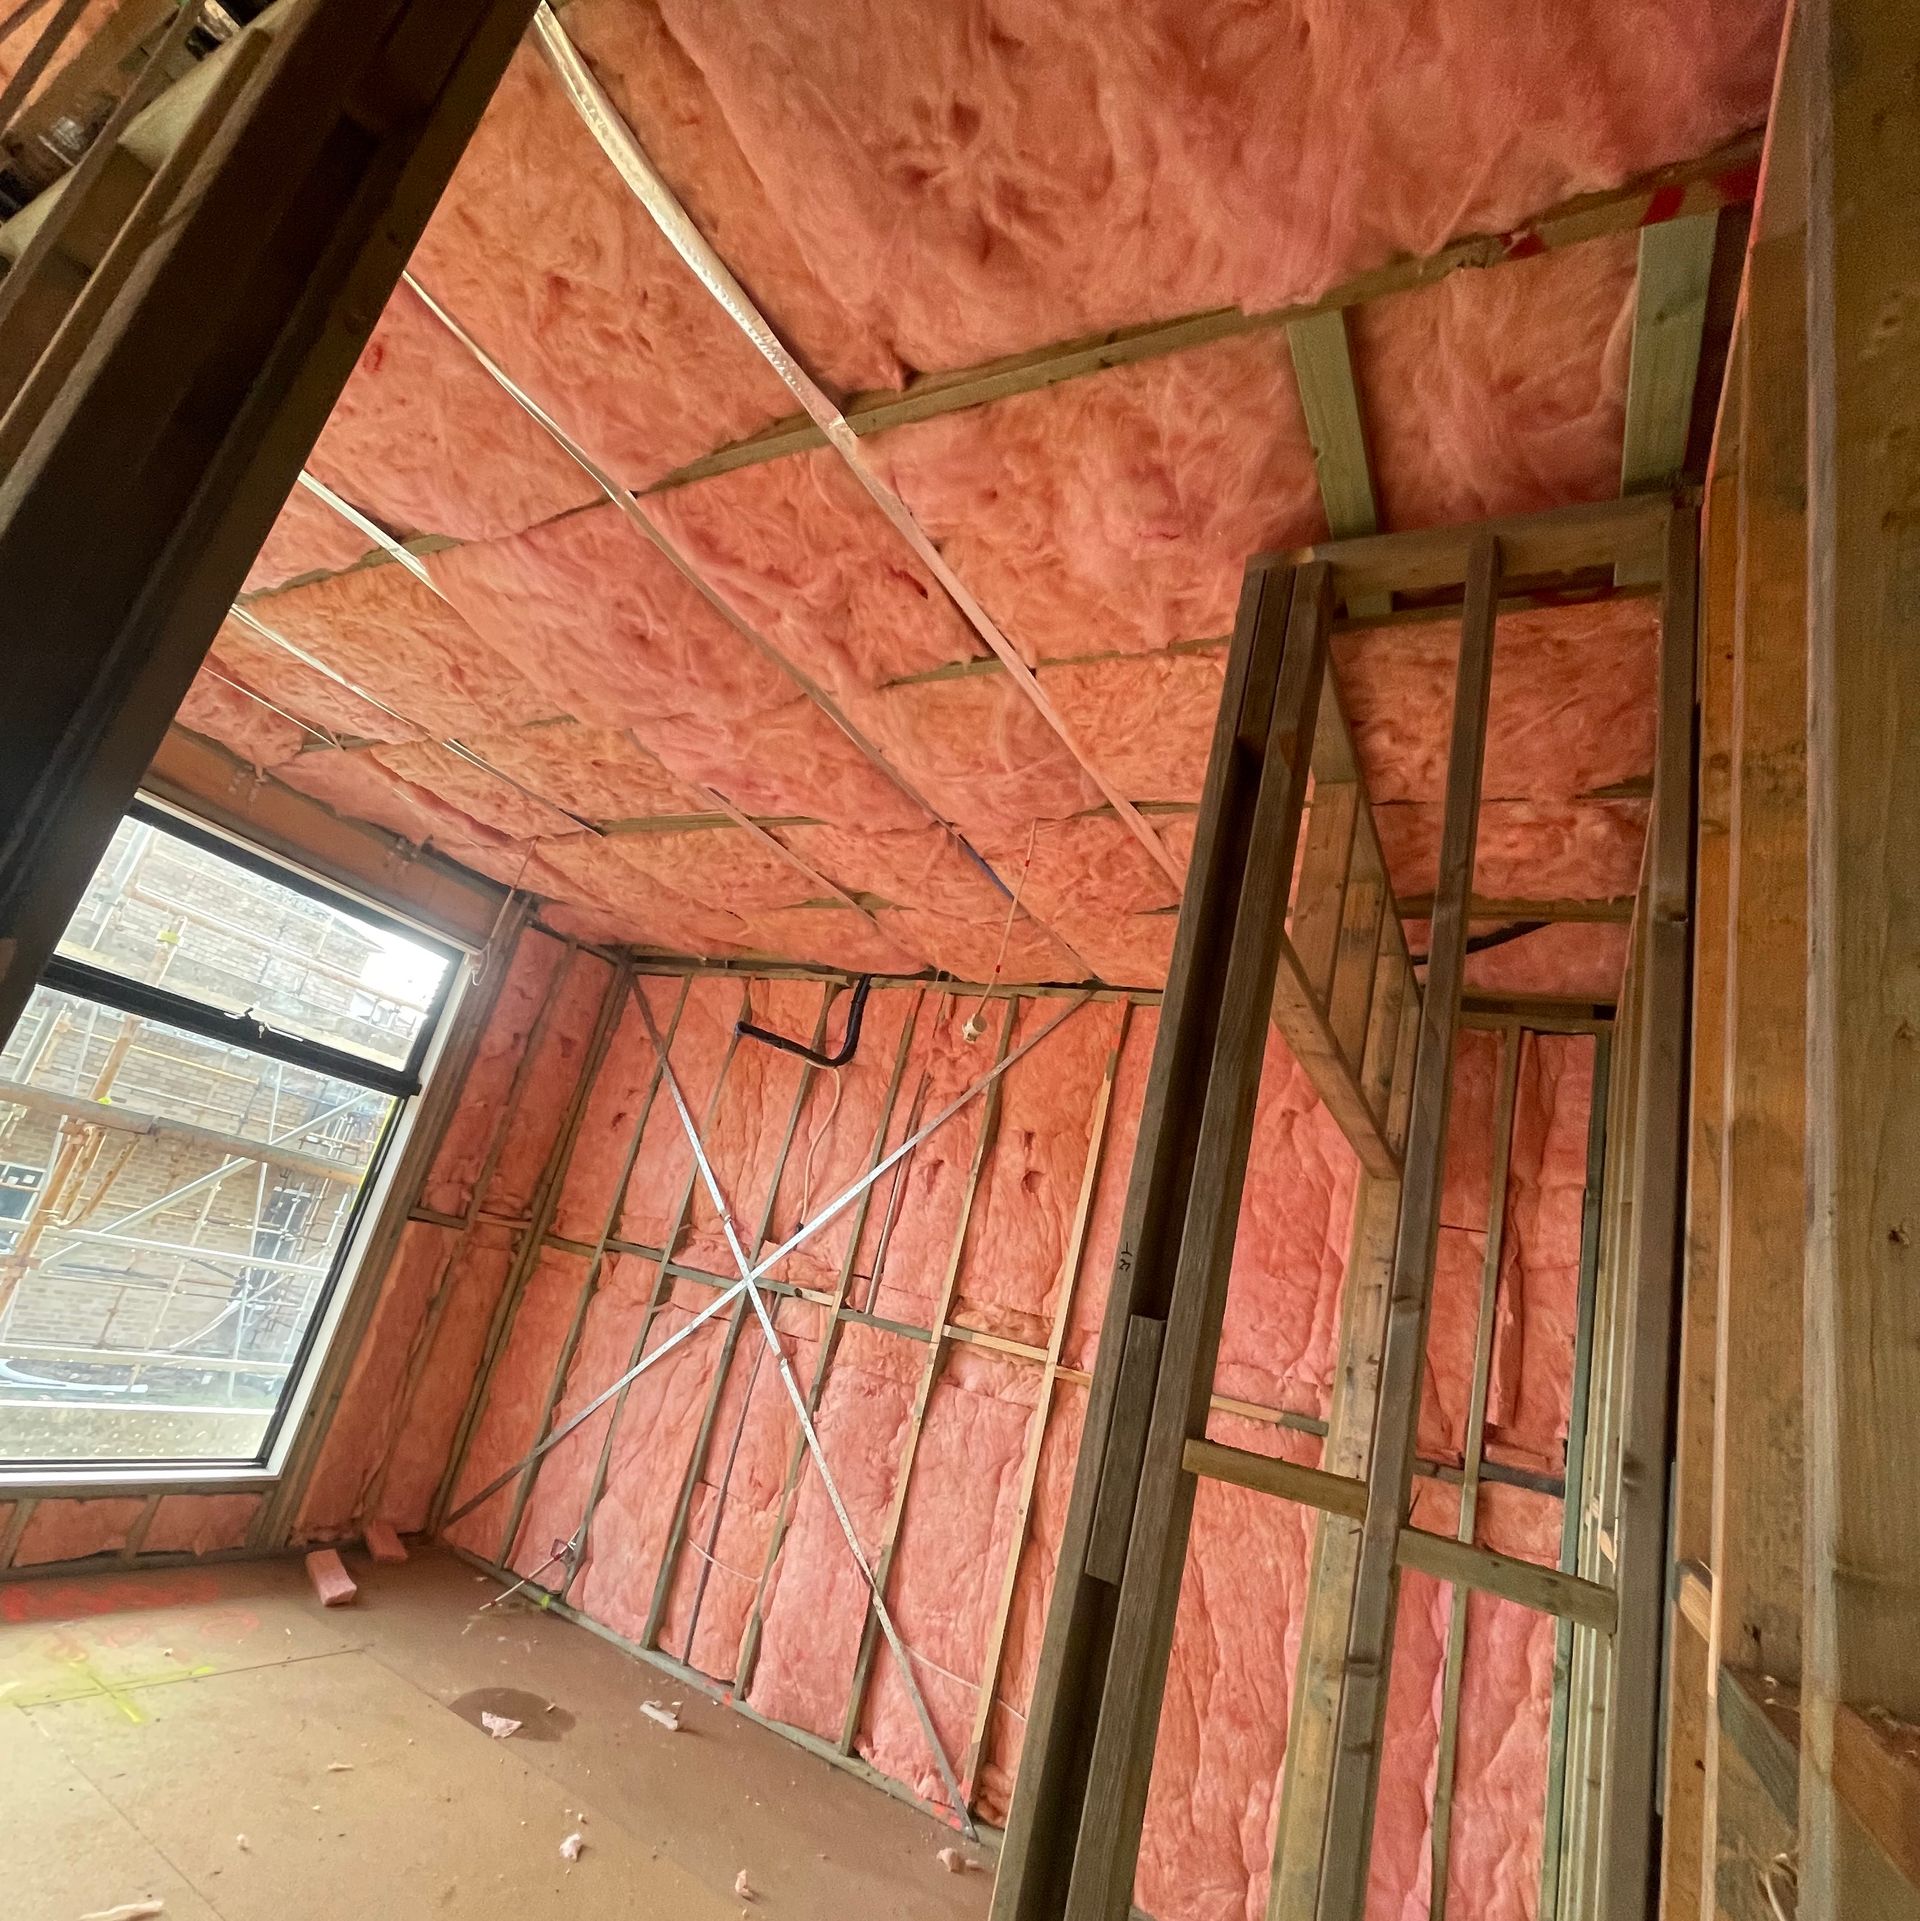 Insulation in Roof and Walls